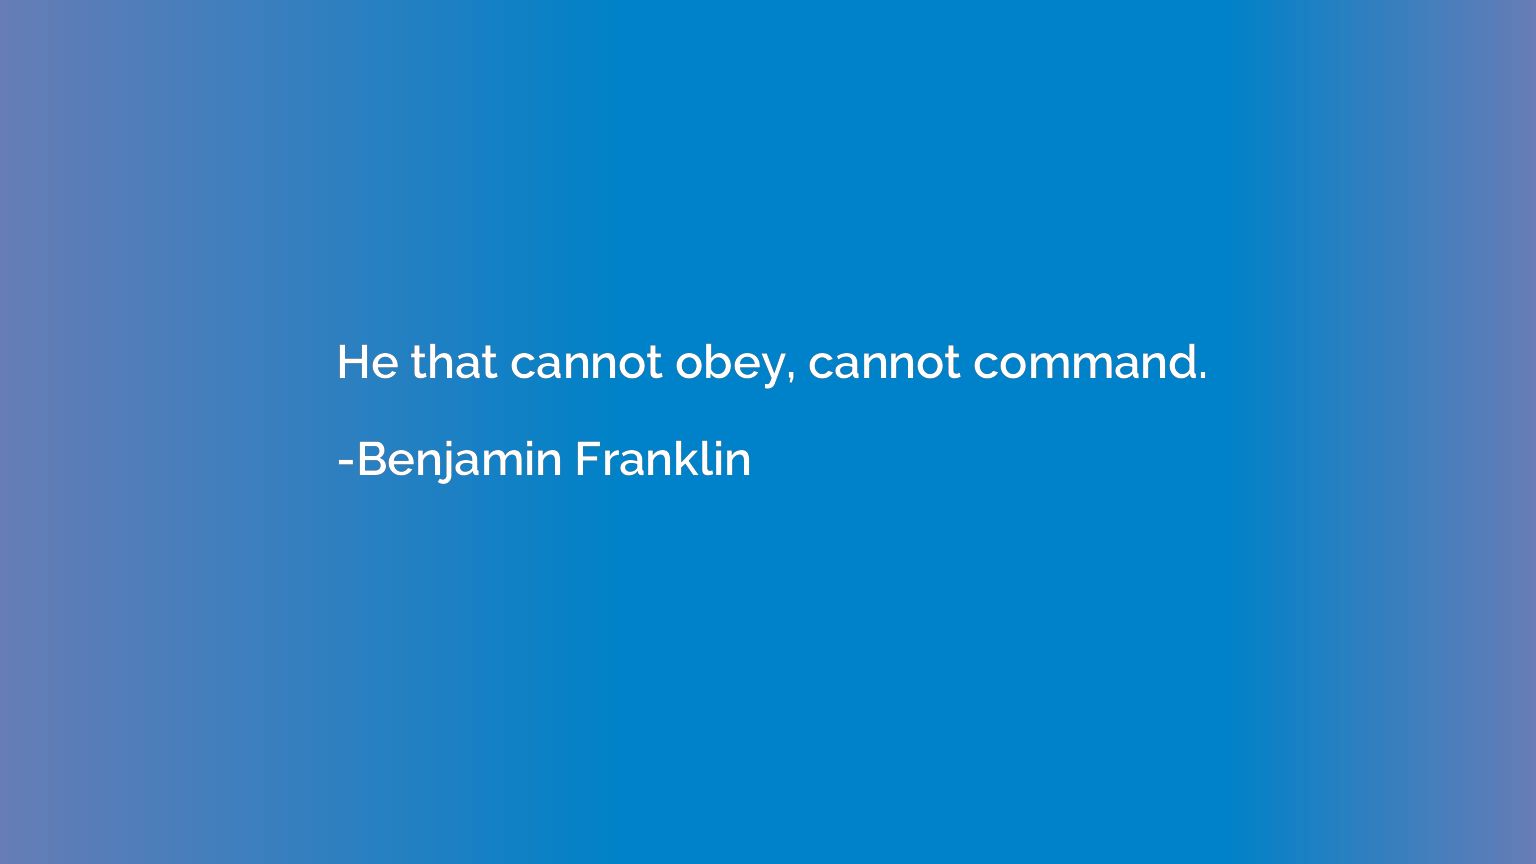 He that cannot obey, cannot command.